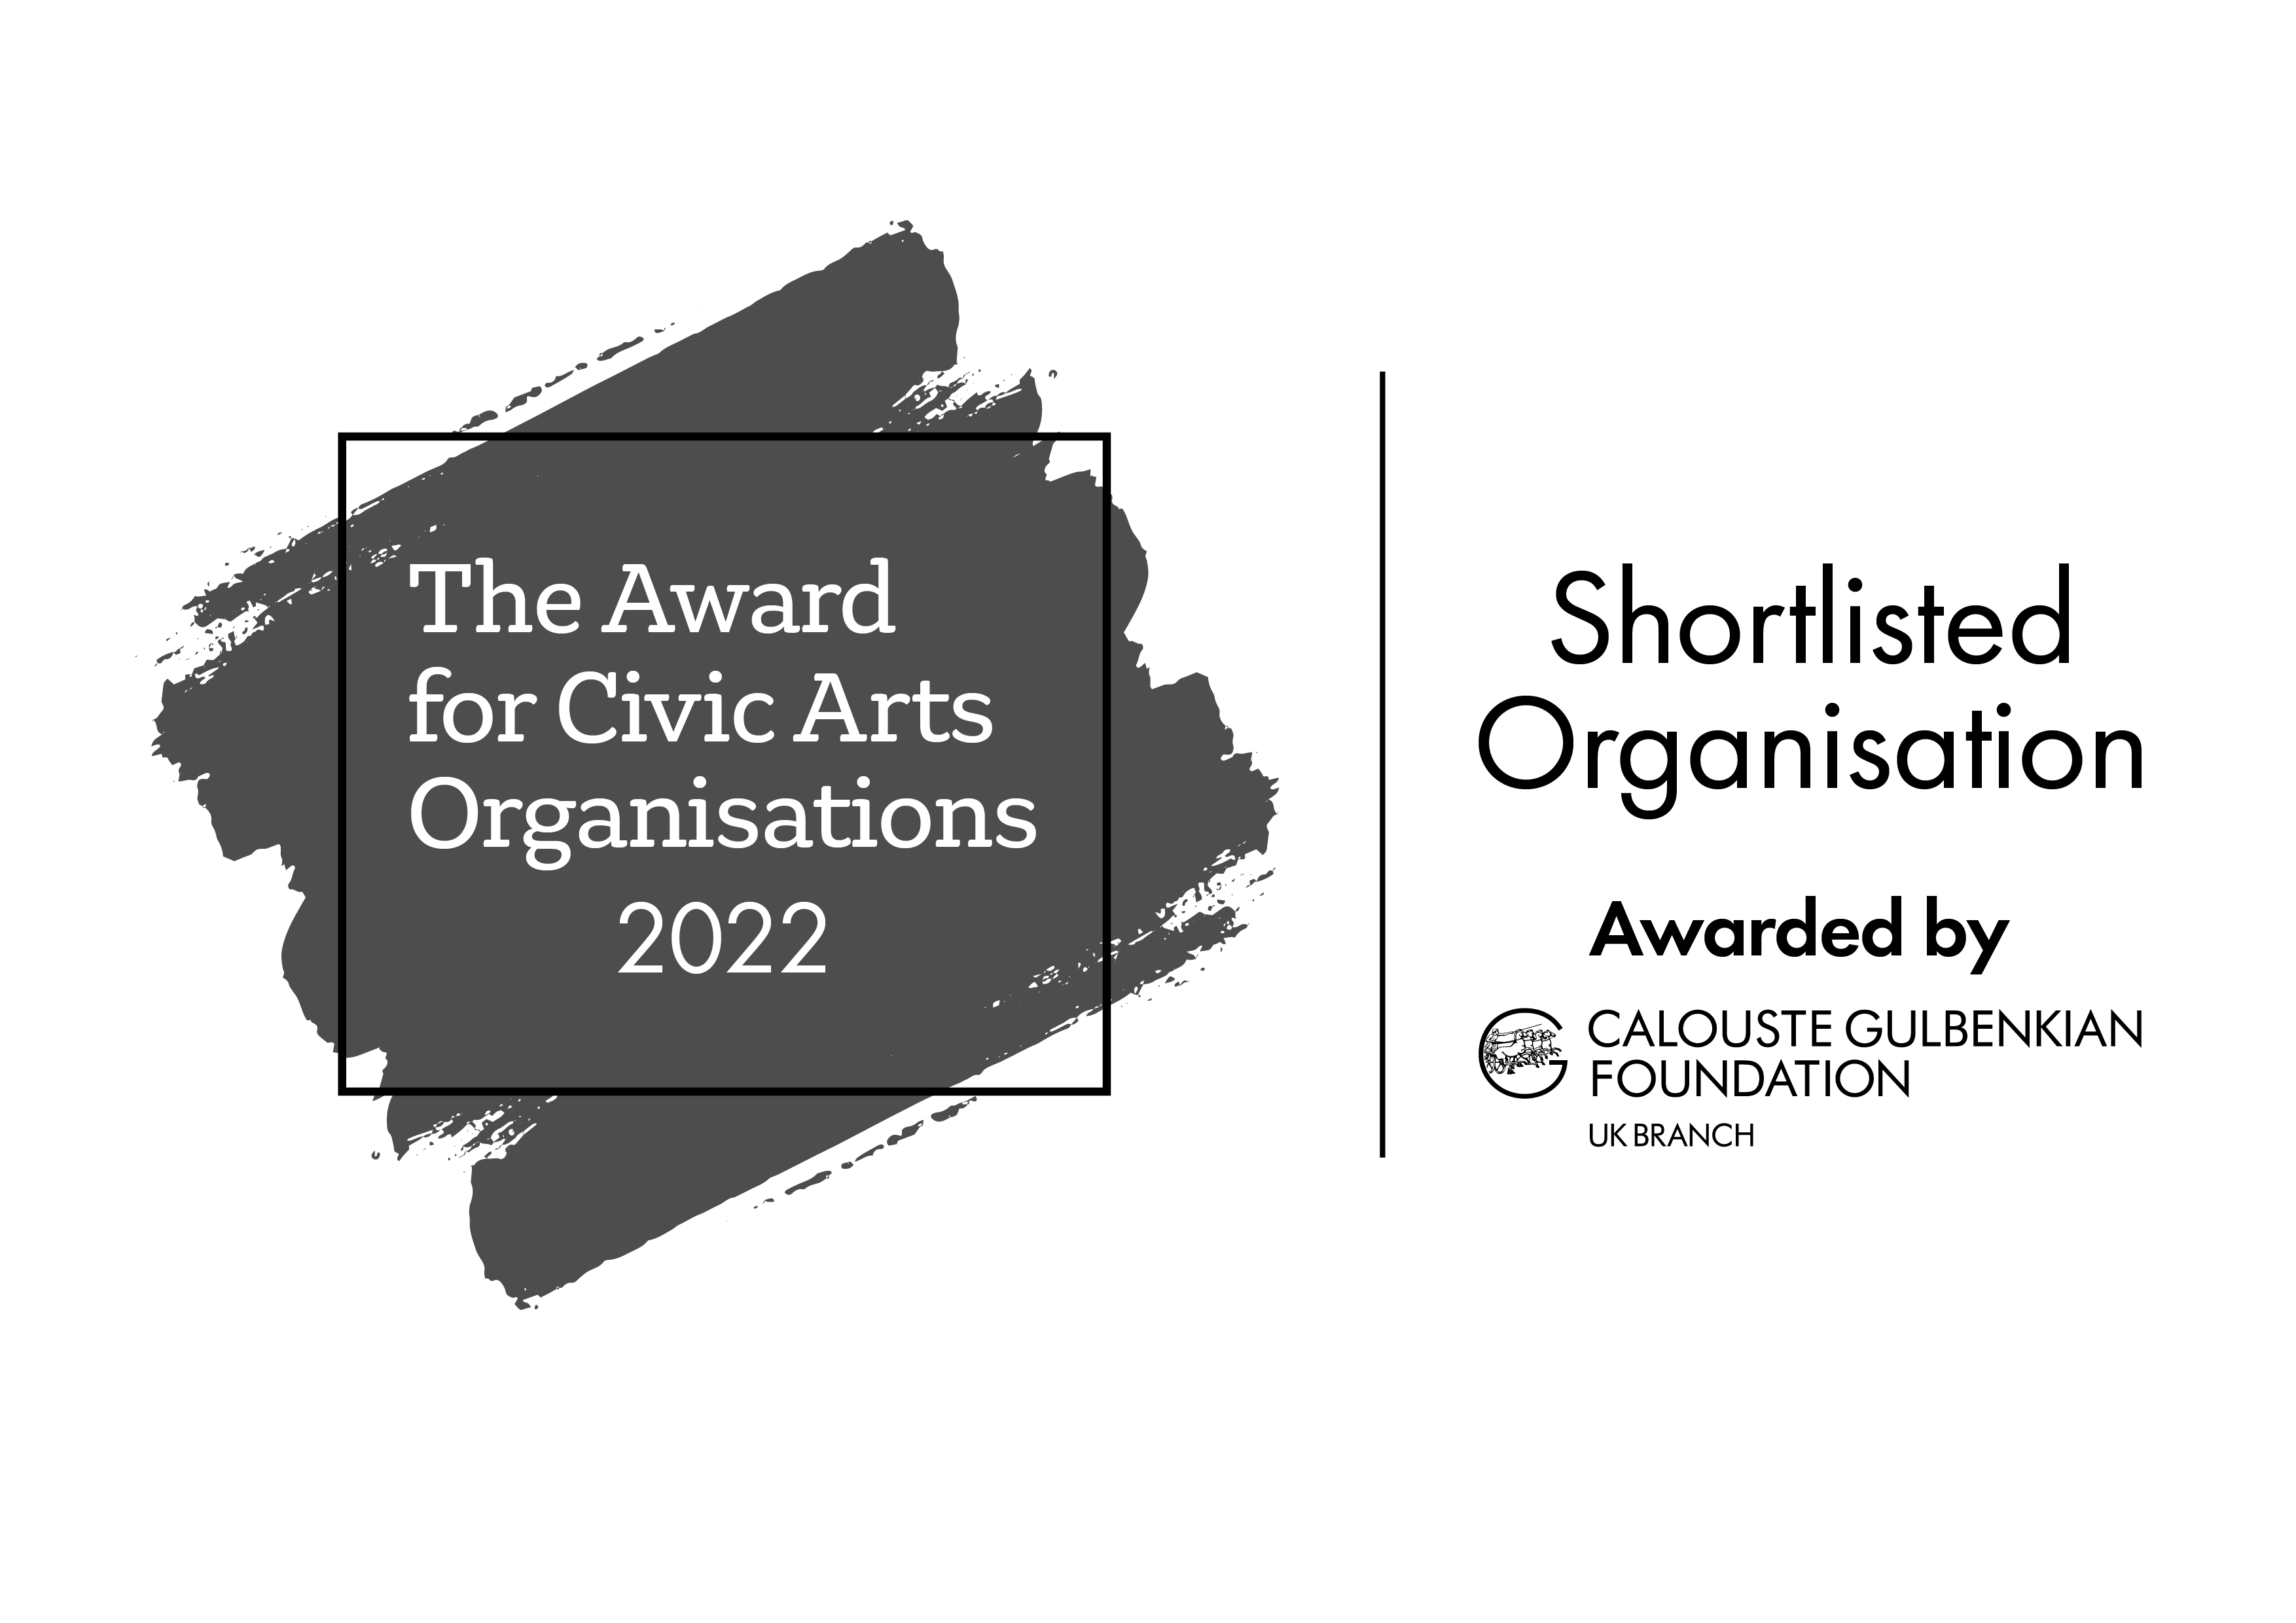 The Award for Civic Arts Organisations 2022 - Shortlisted Organisation